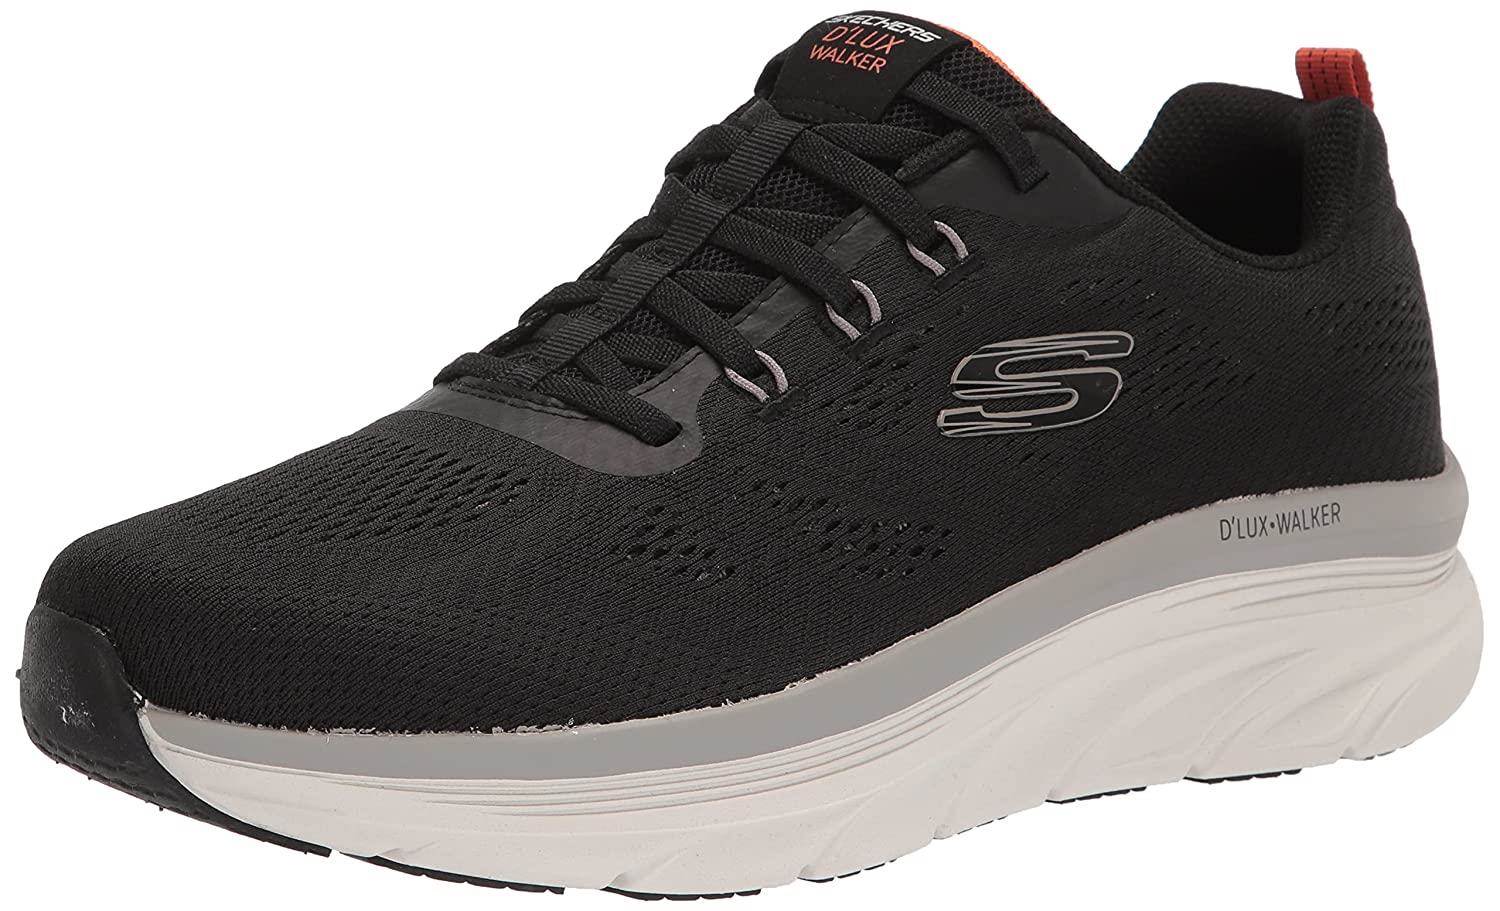 Skechers Brand Mens Relaxed Fit D'Lux Walker Slipons Sports Shoes ...